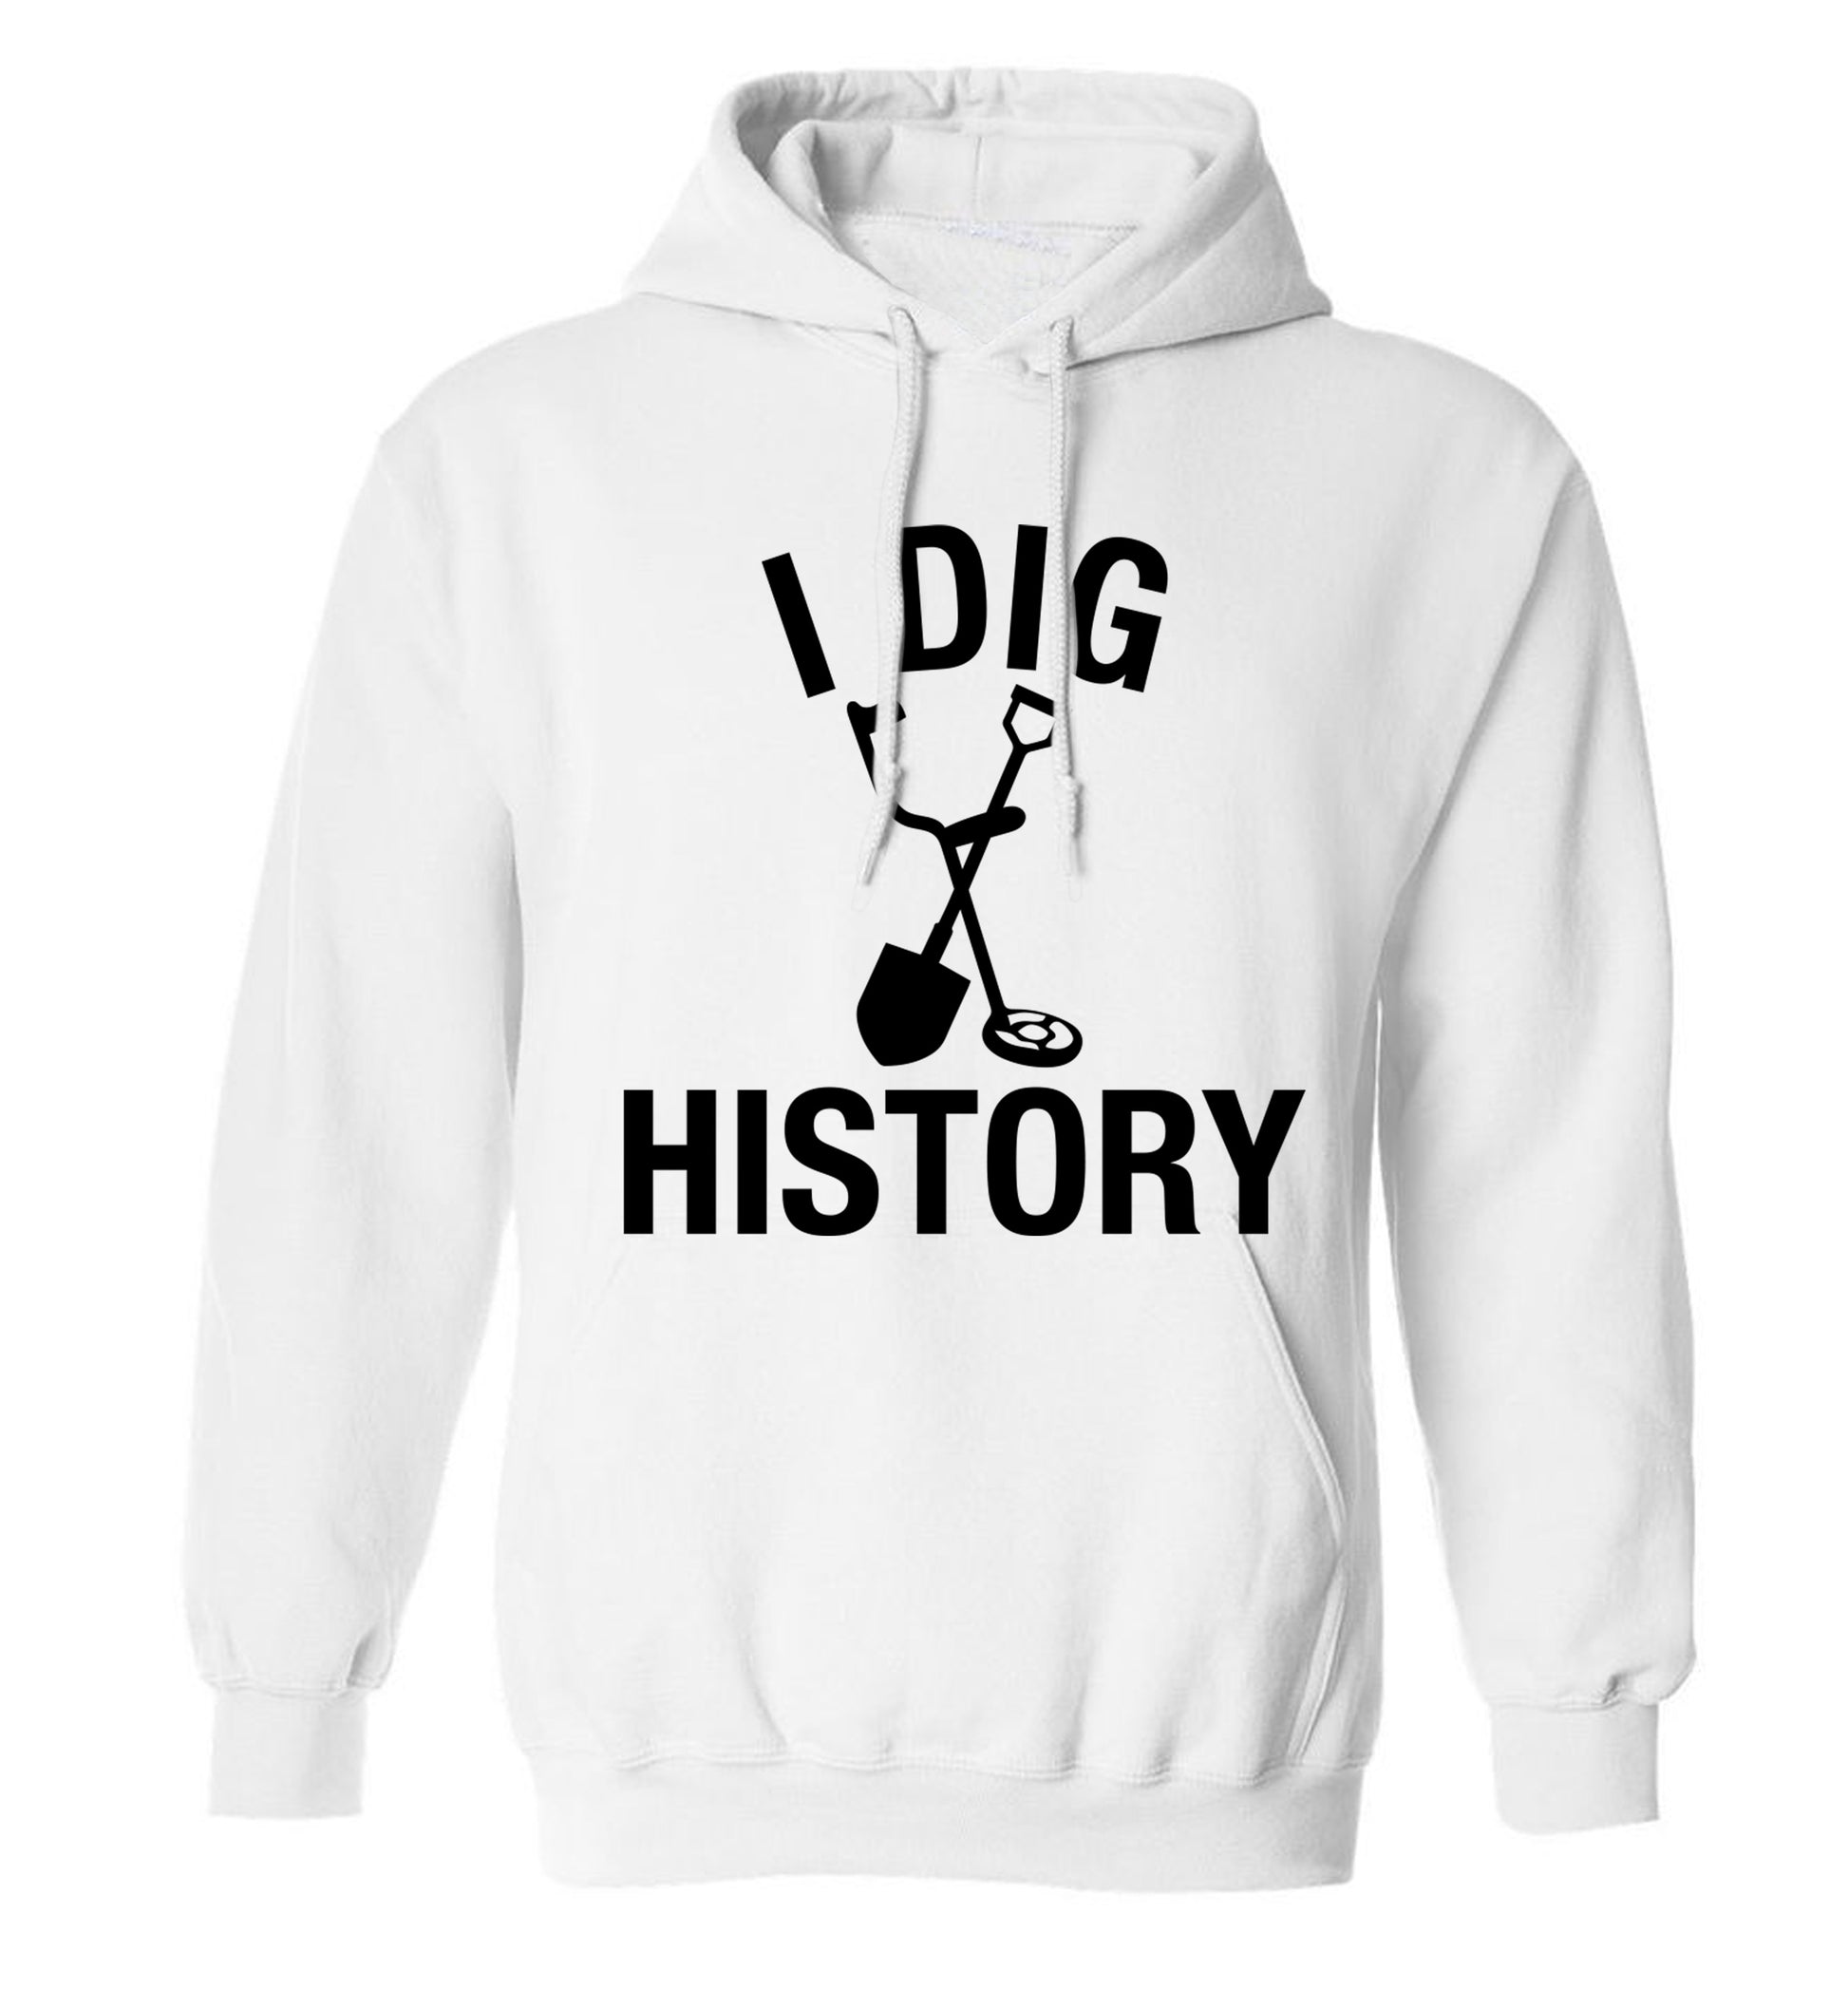 I dig history adults unisex white hoodie 2XL